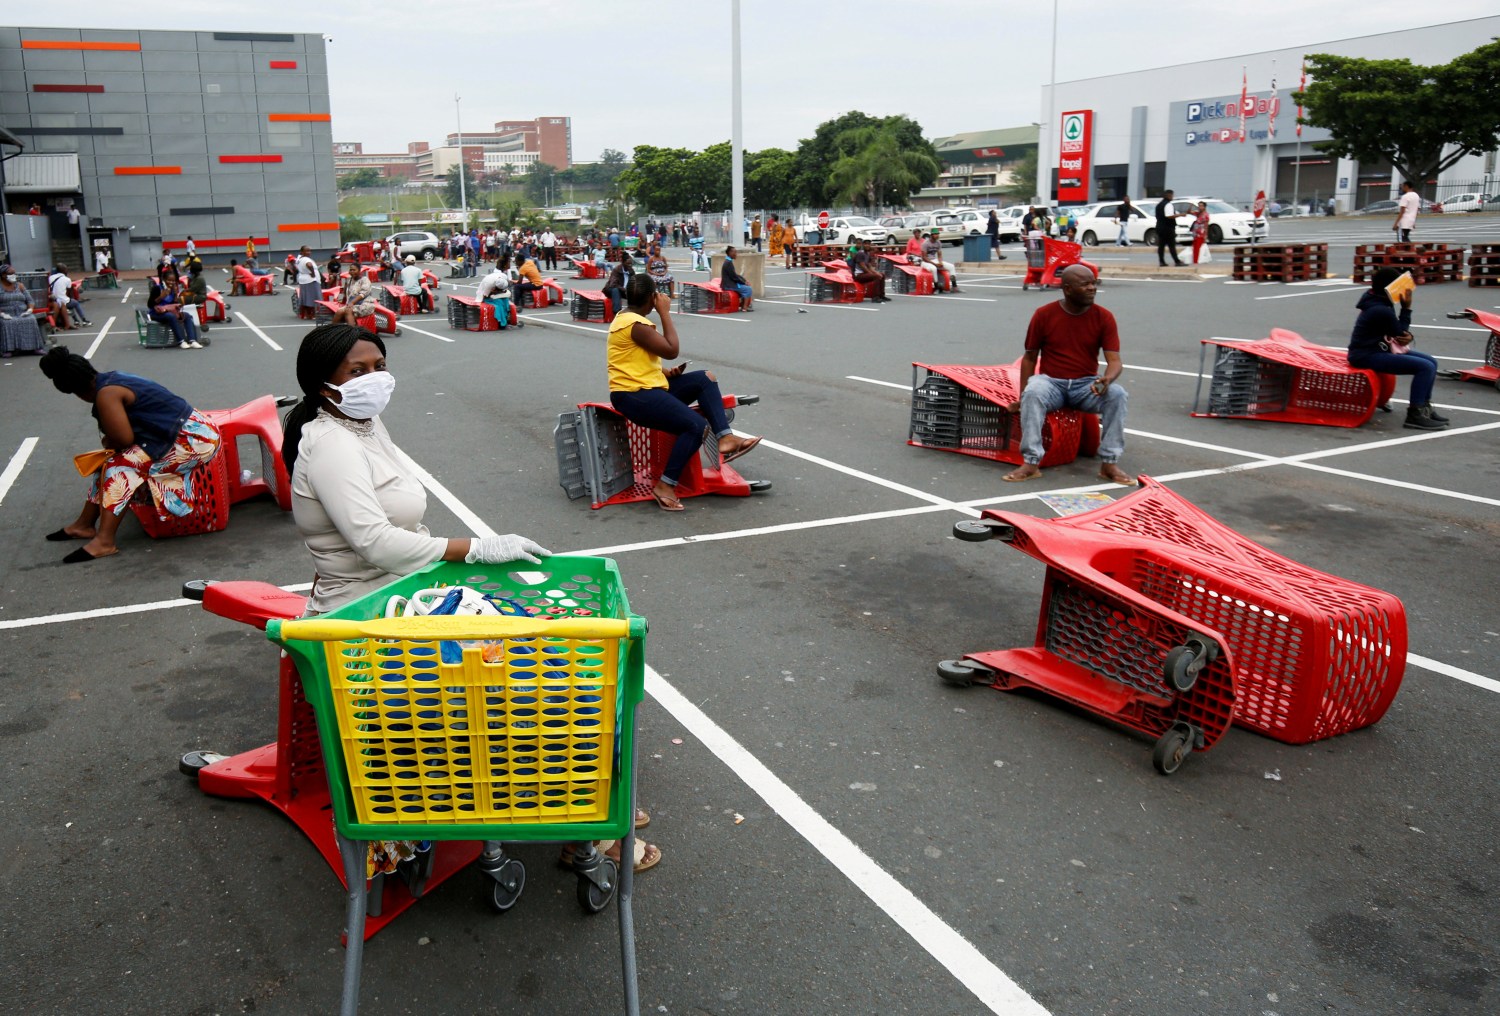 Shoppers queue at a grocery store during a nationwide 21 day lockdown in an attempt to contain the coronavirus disease (COVID-19) outbreak in Chatsworth near Durban, South Africa, March 31, 2020. REUTERS/Rogan Ward  REFILE - CORRECTING INFORMATION     TPX IMAGES OF THE DAY